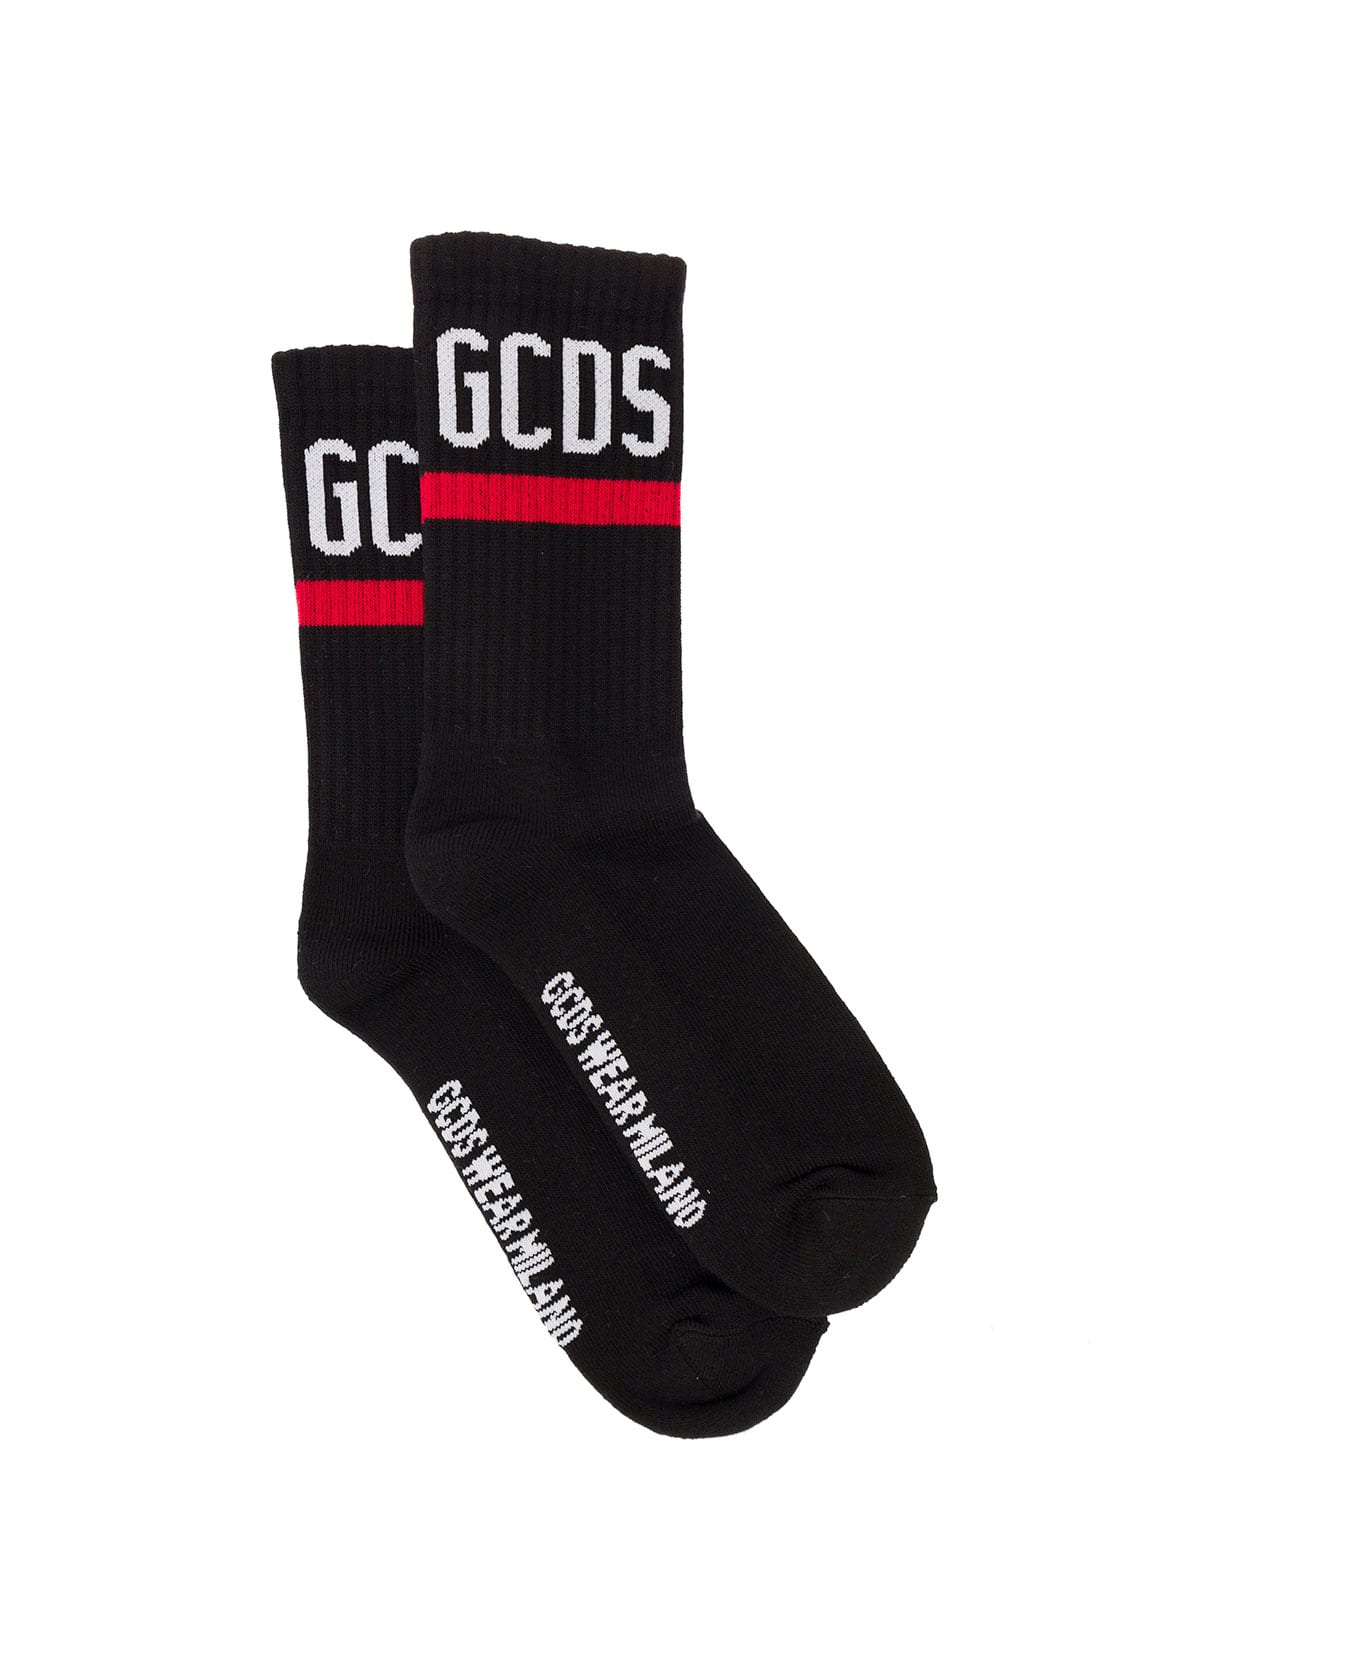 GCDS Black Socks In Terry Cloth With Logo And Contrasting Photo Gcds Woman - Black